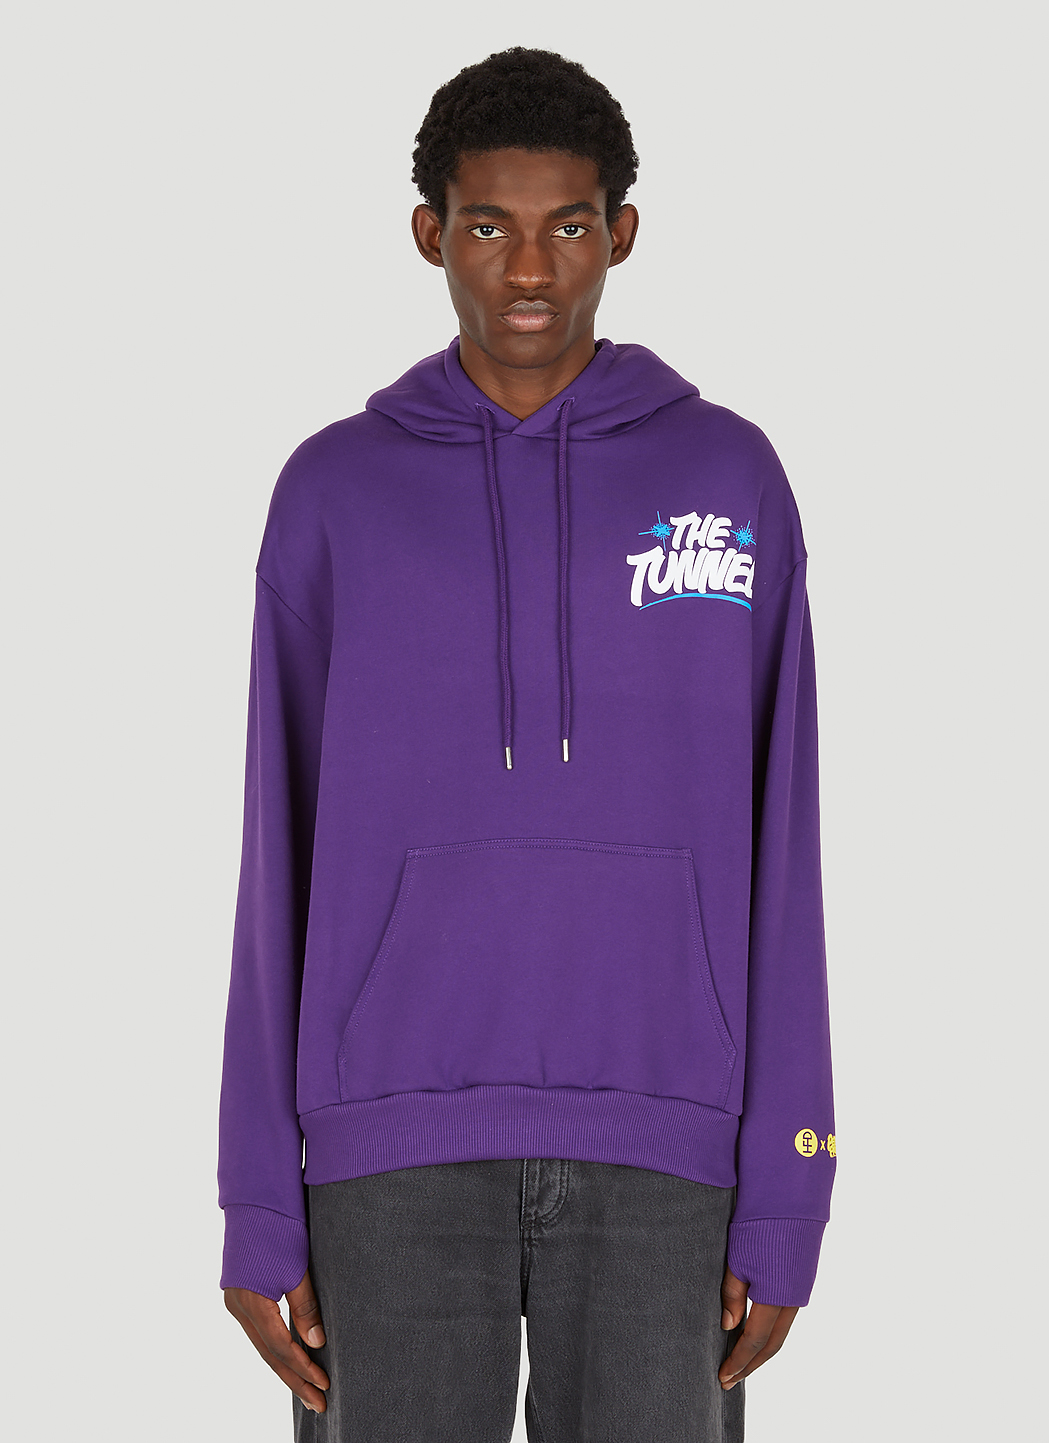 x Peter Paid The Tunnel Hooded Sweatshirt